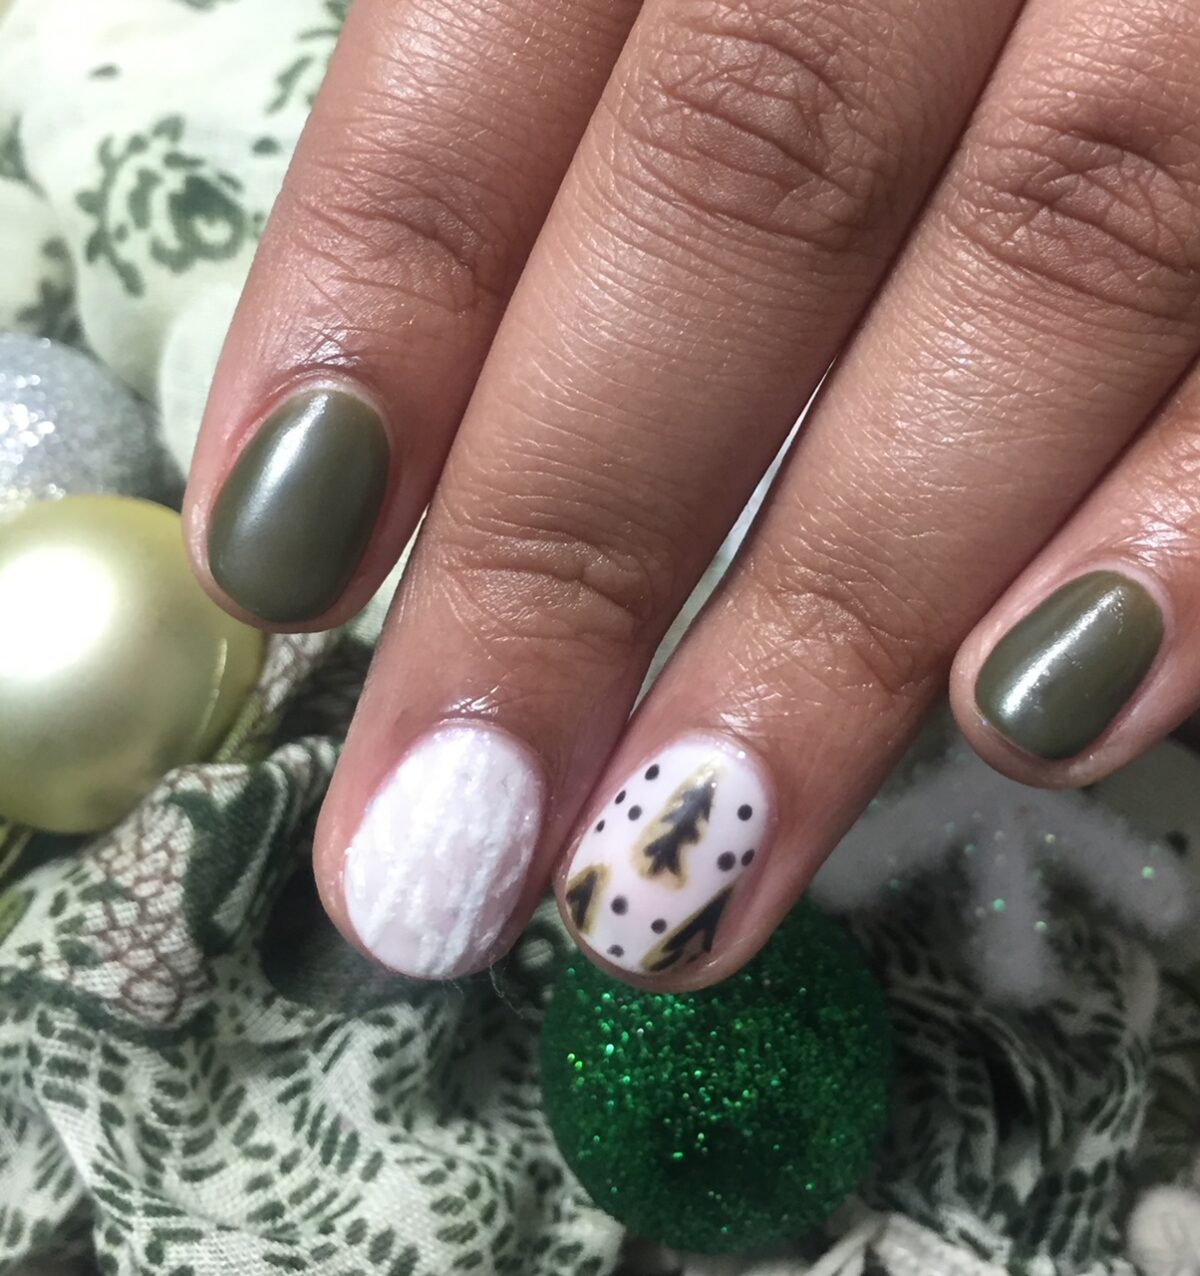 Winter nail trends